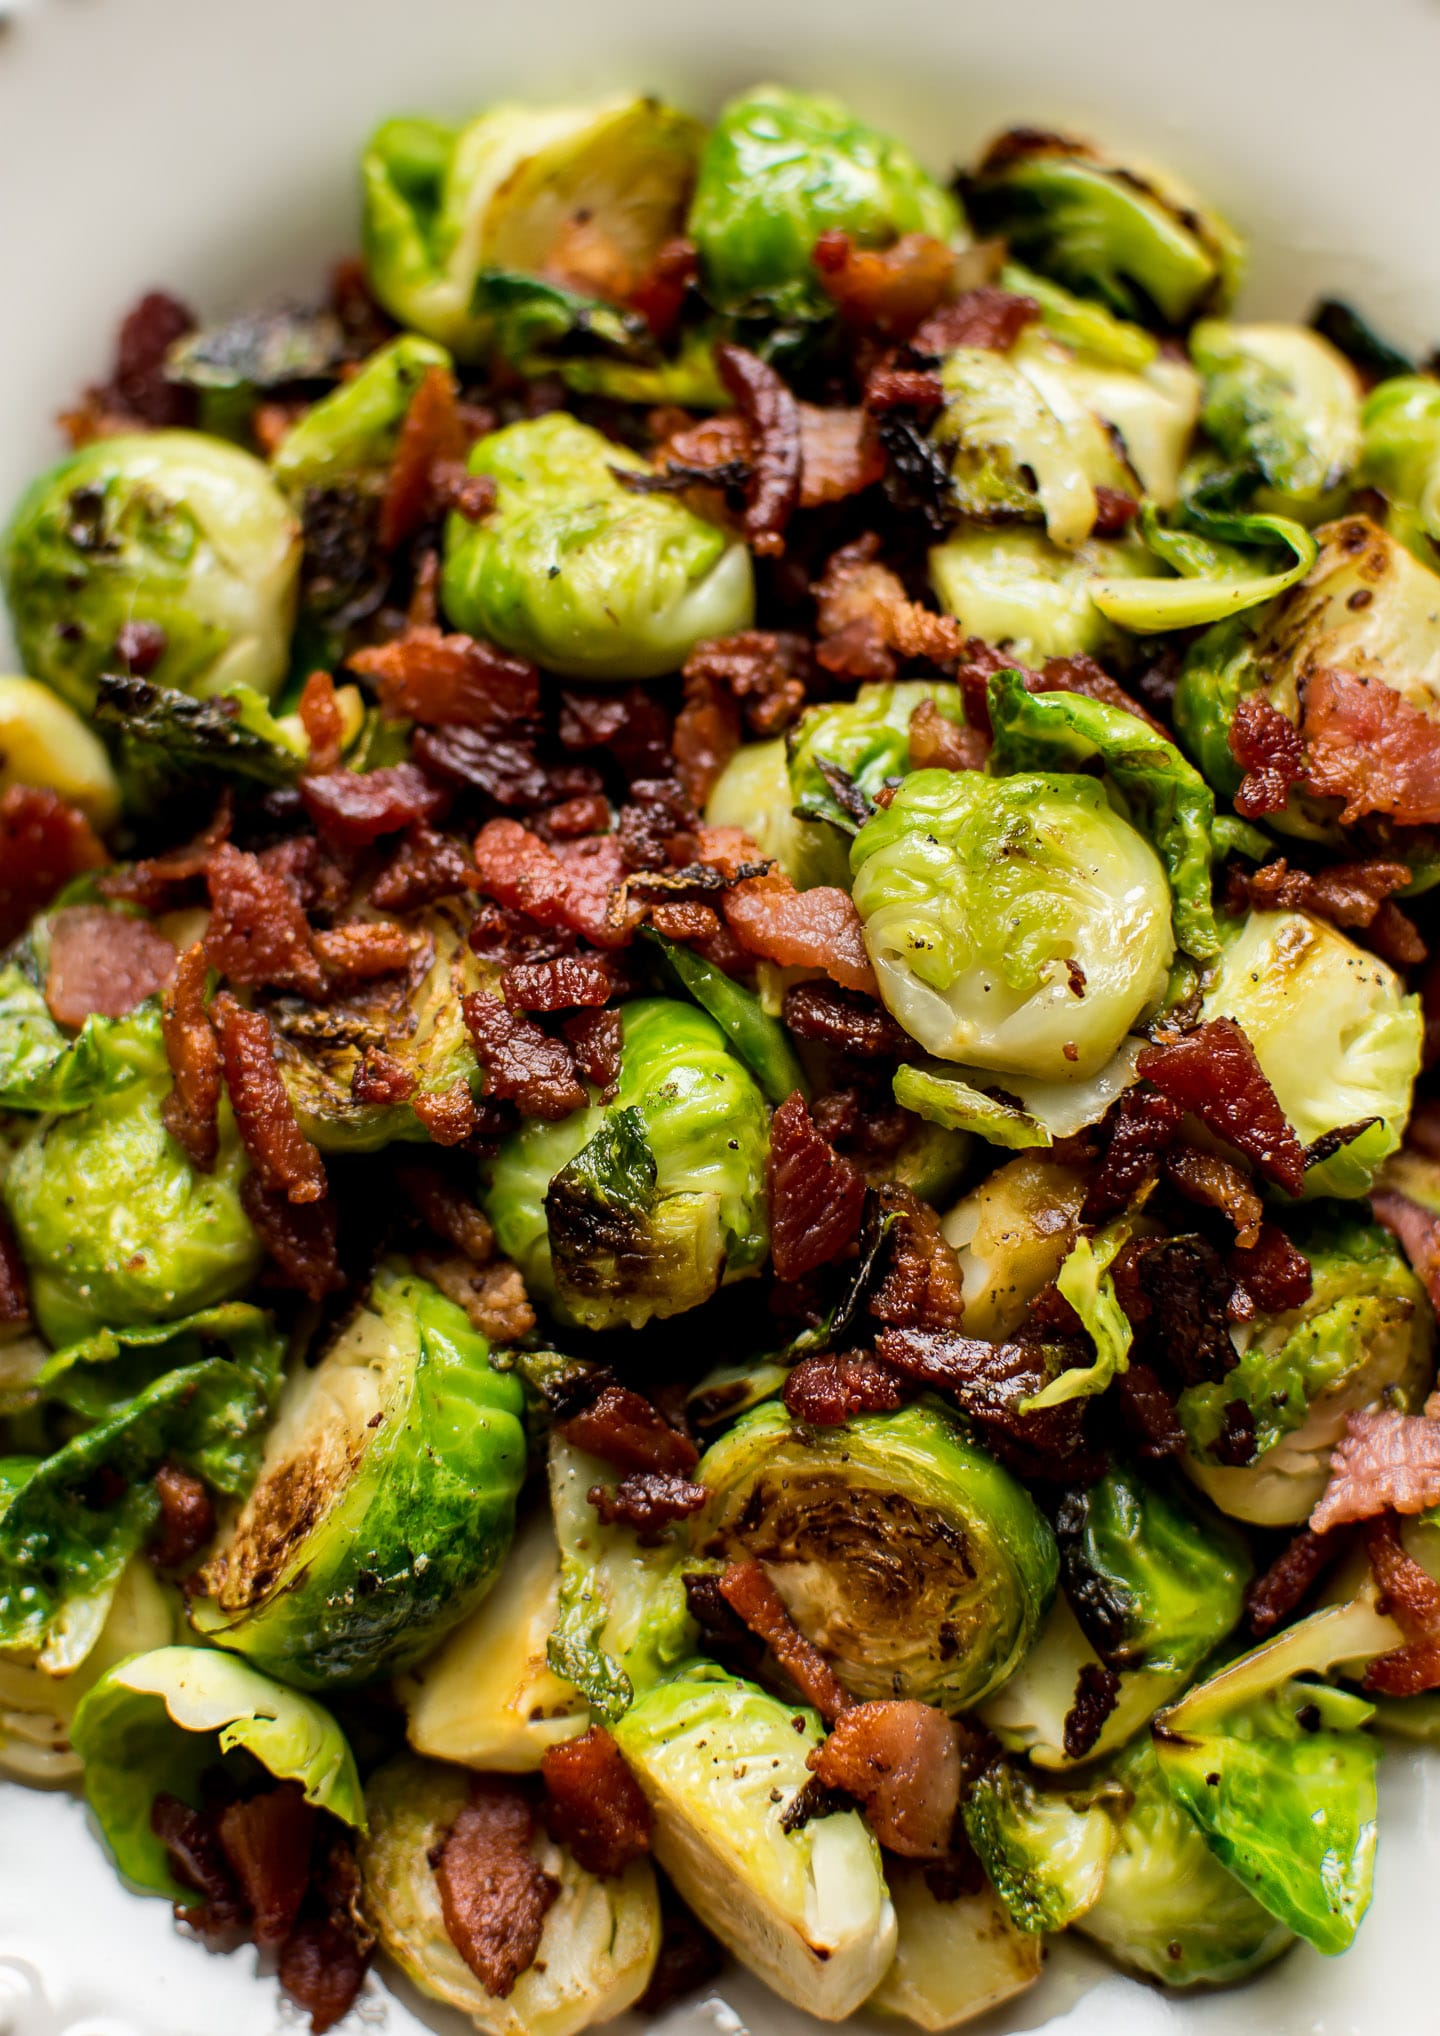 Perry's Steakhouse Brussel Sprouts Recipe - Find Vegetarian Recipes